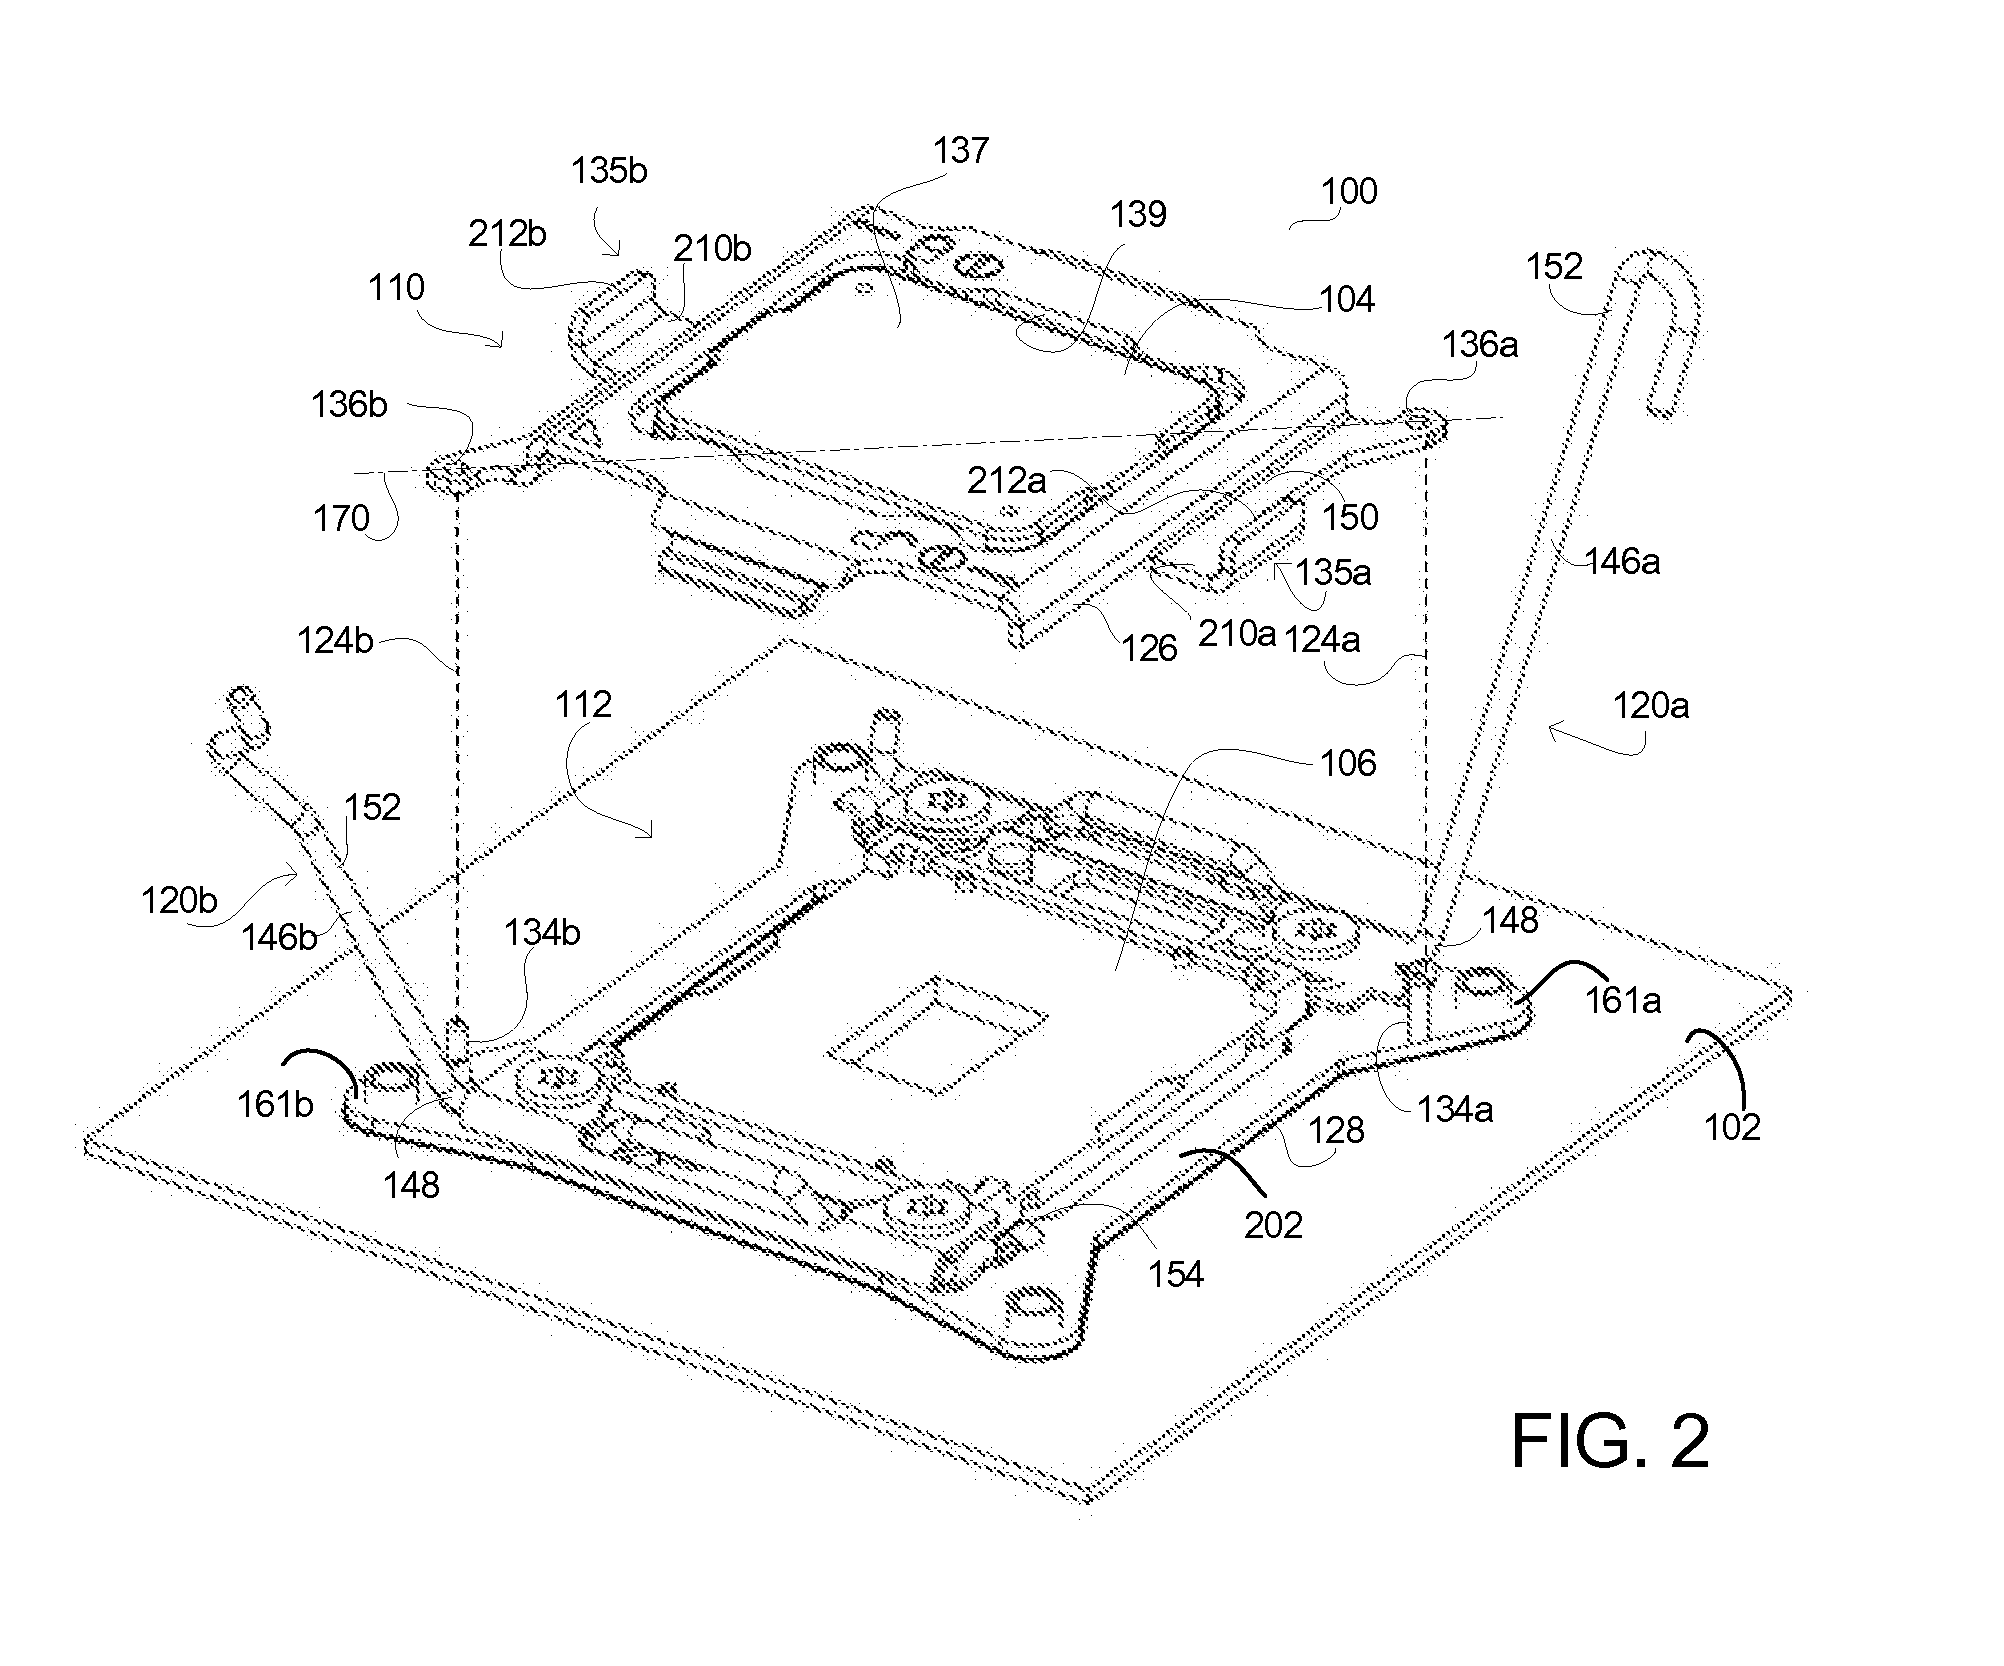 Contact protection for integrated circuit device loading